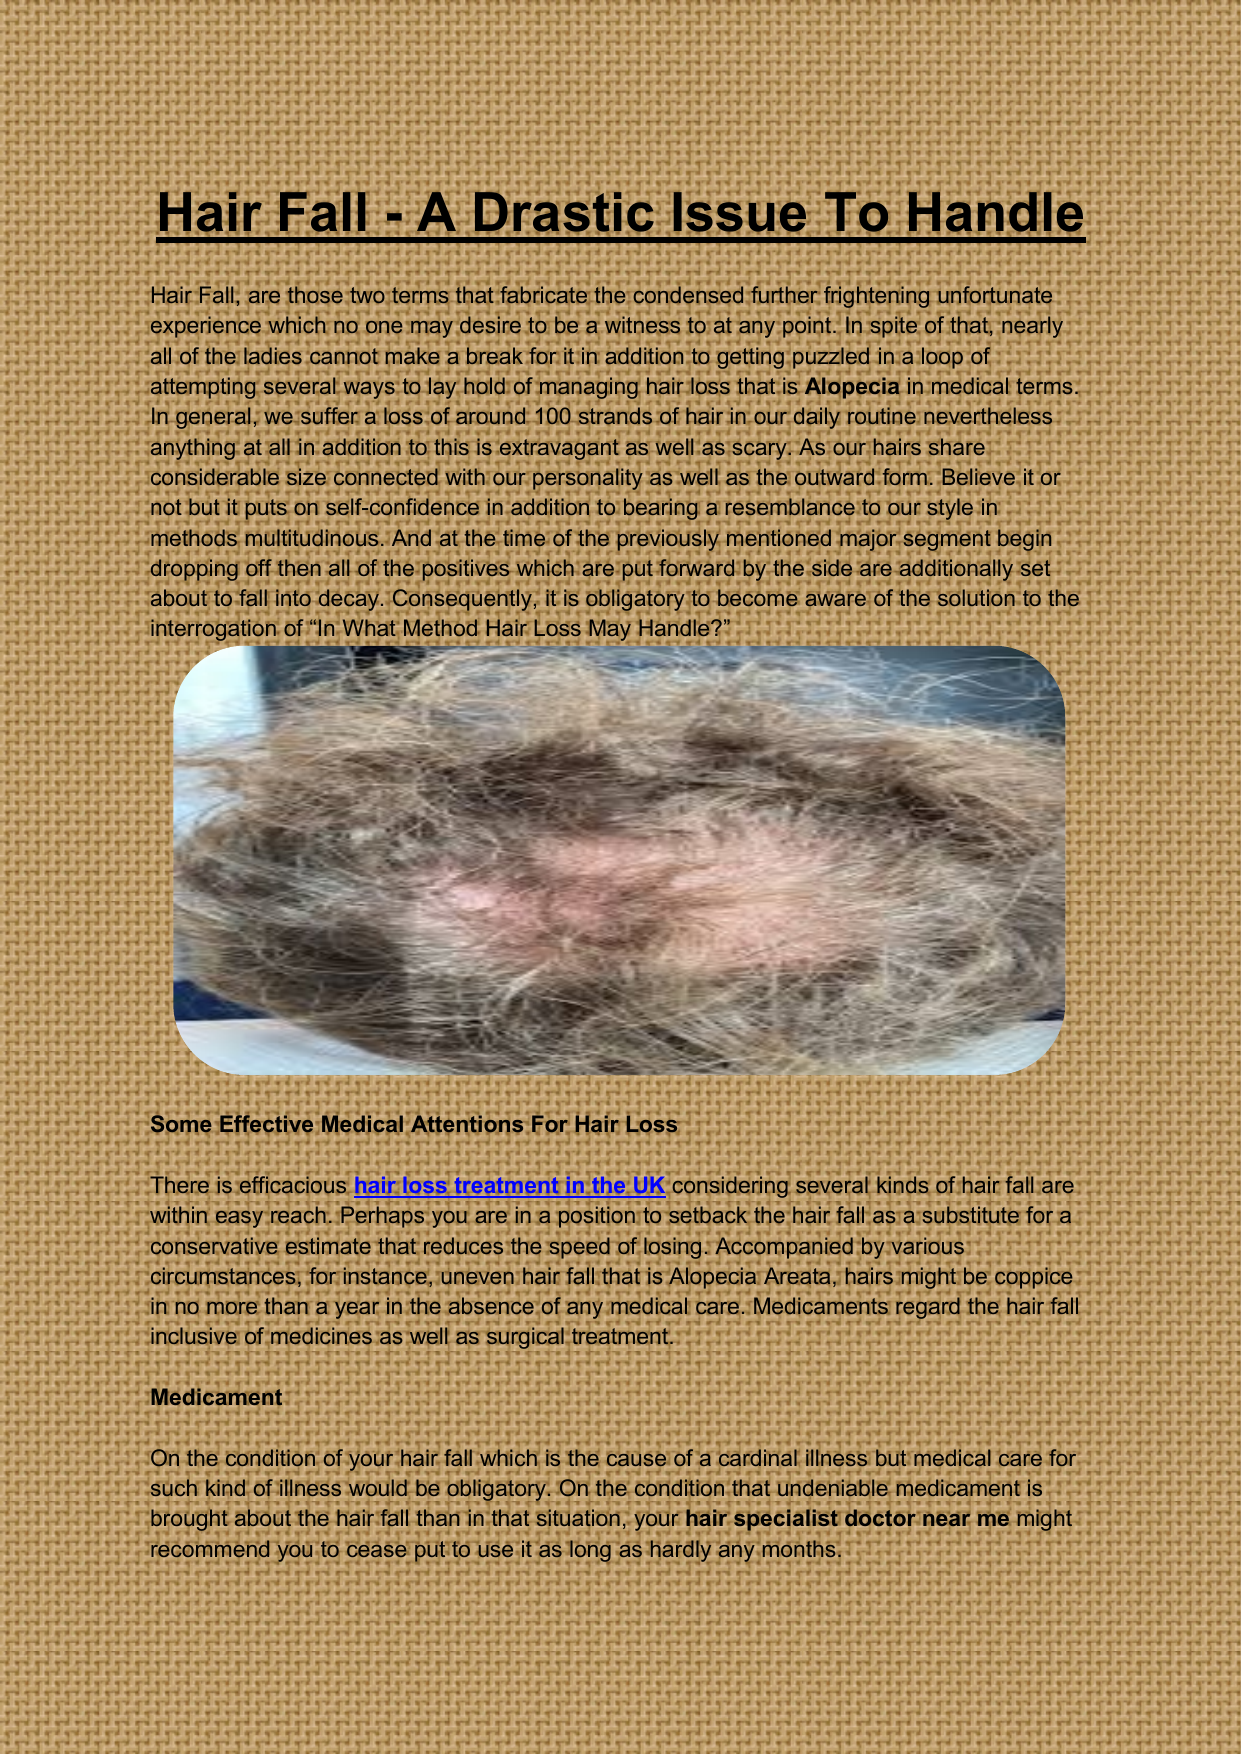 Hair Fall - A Drastic Issue To Handle